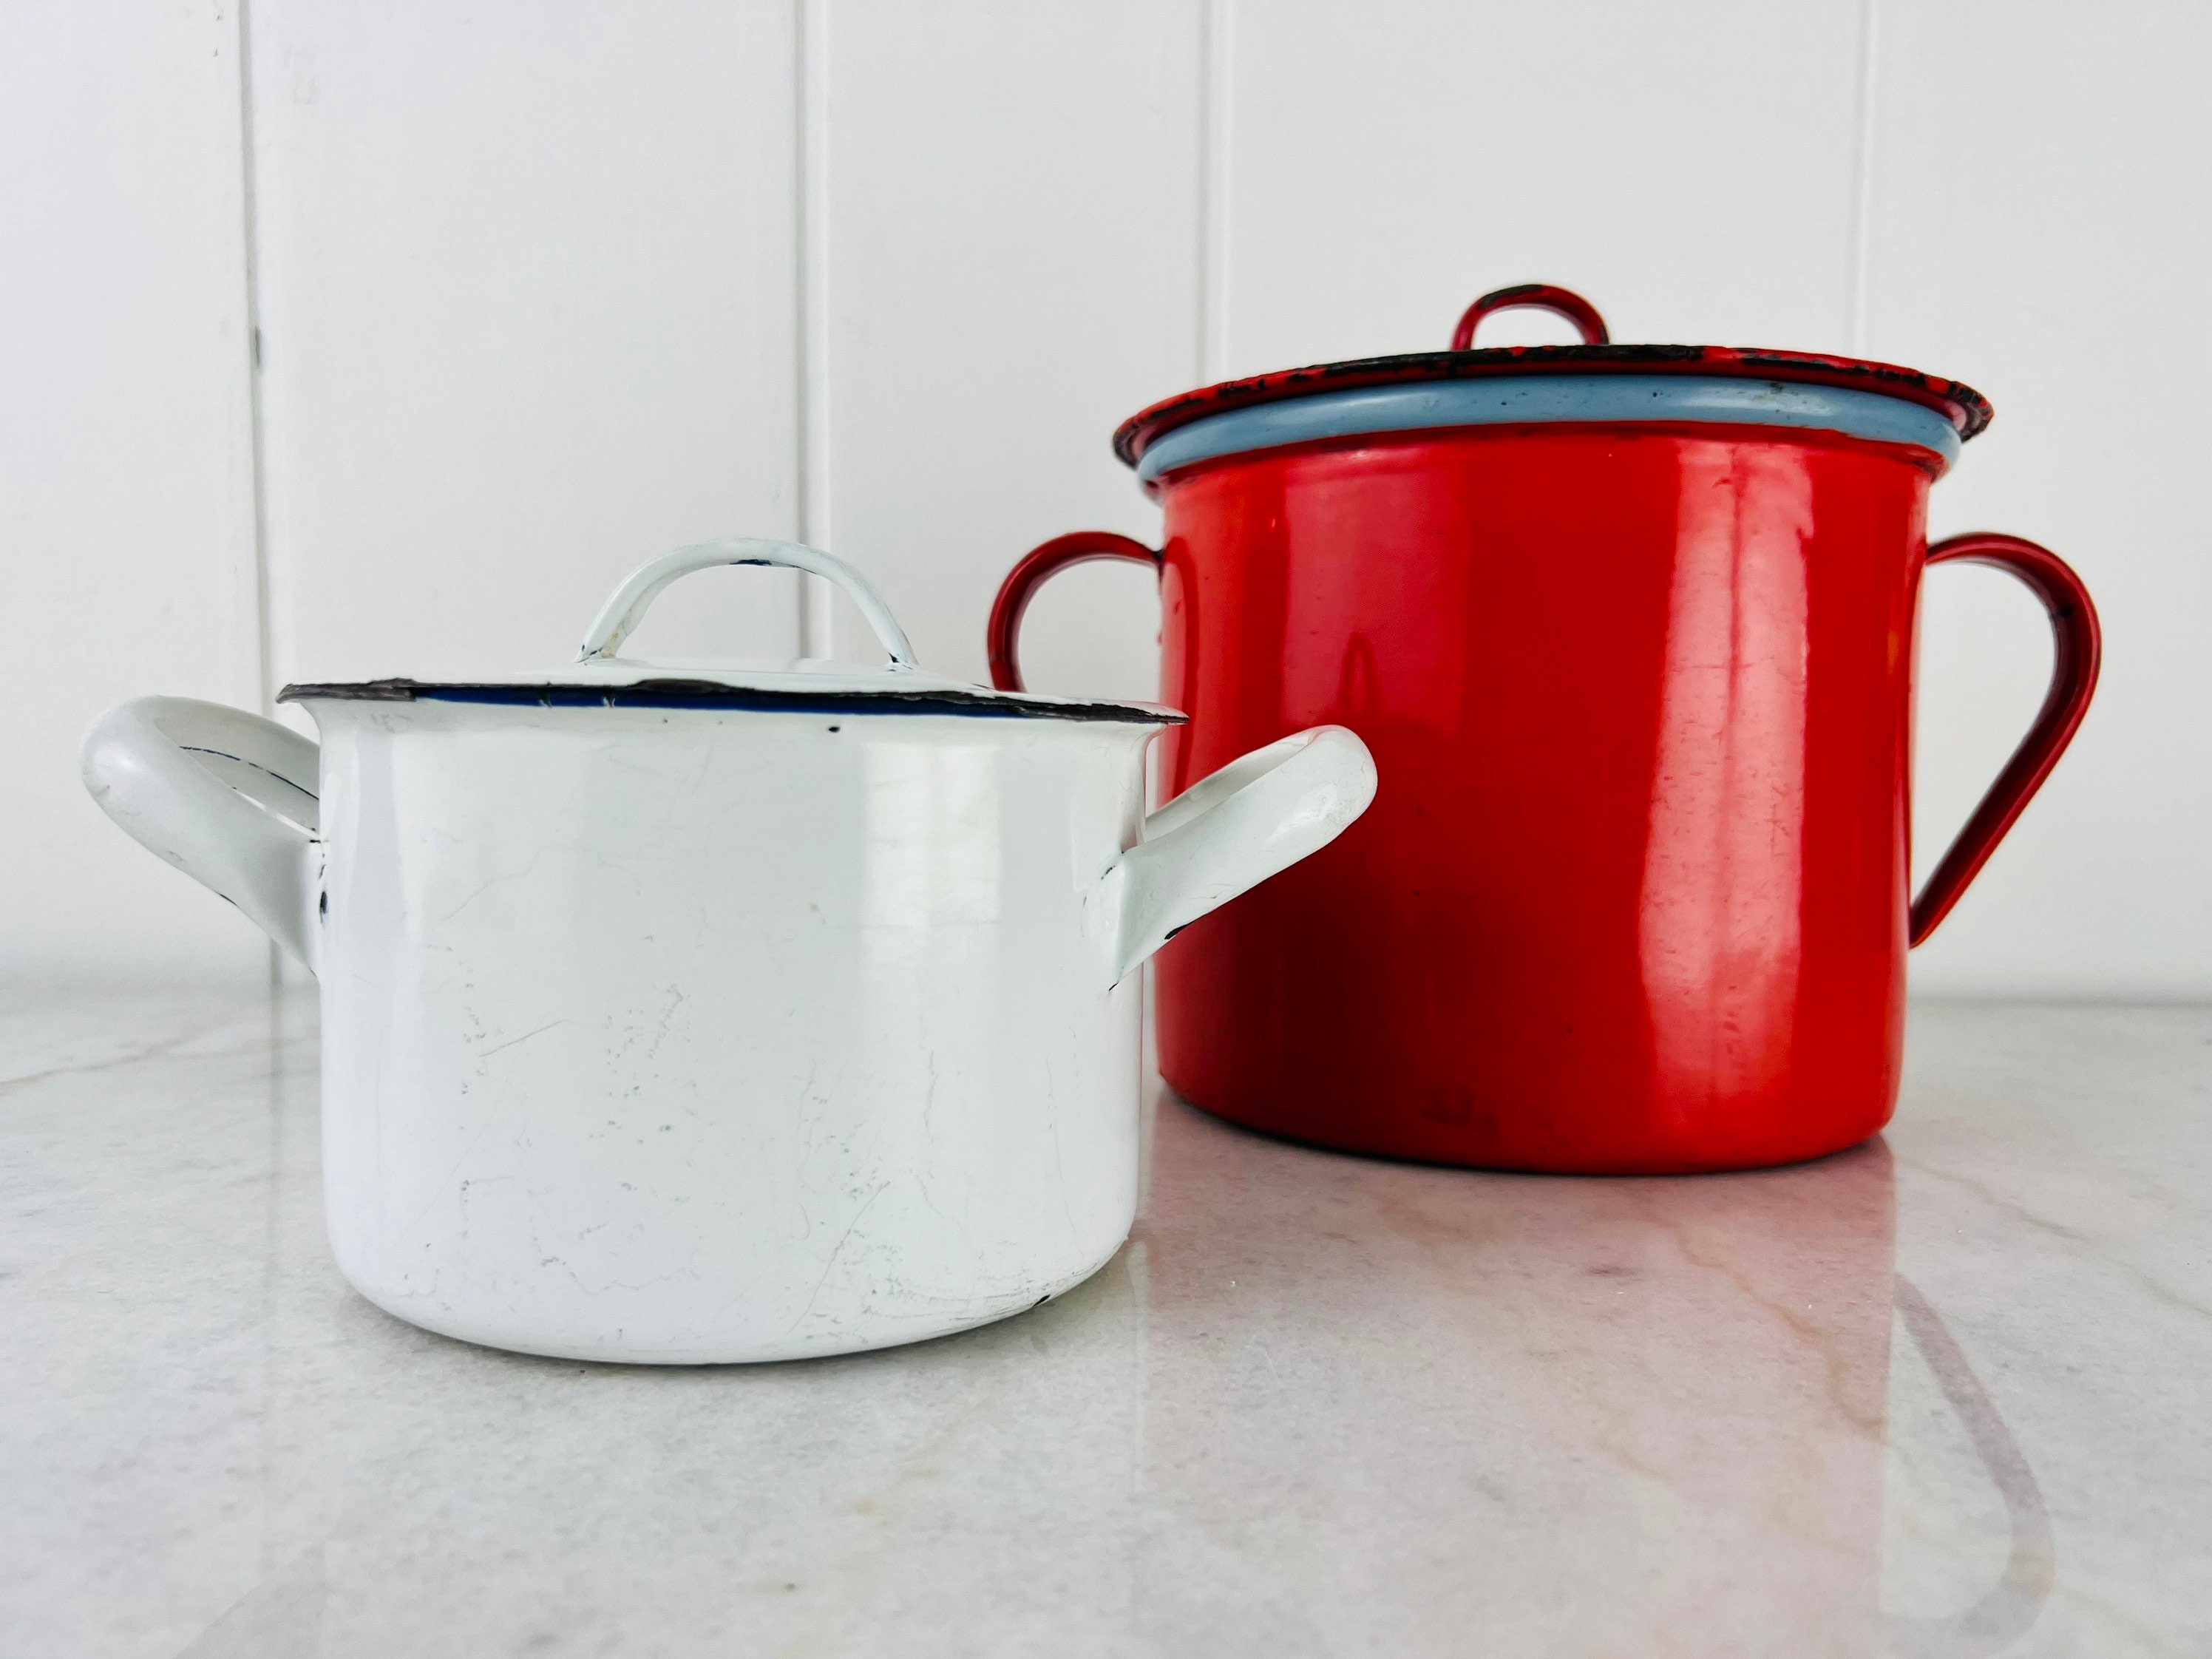 Vintage 1930s to 1950s Enamel Pot/pan White/red Rusty/chippy/rotted Plant  Holder Farmhouse/country Kitchen Retro Display No Lid Outdoors 